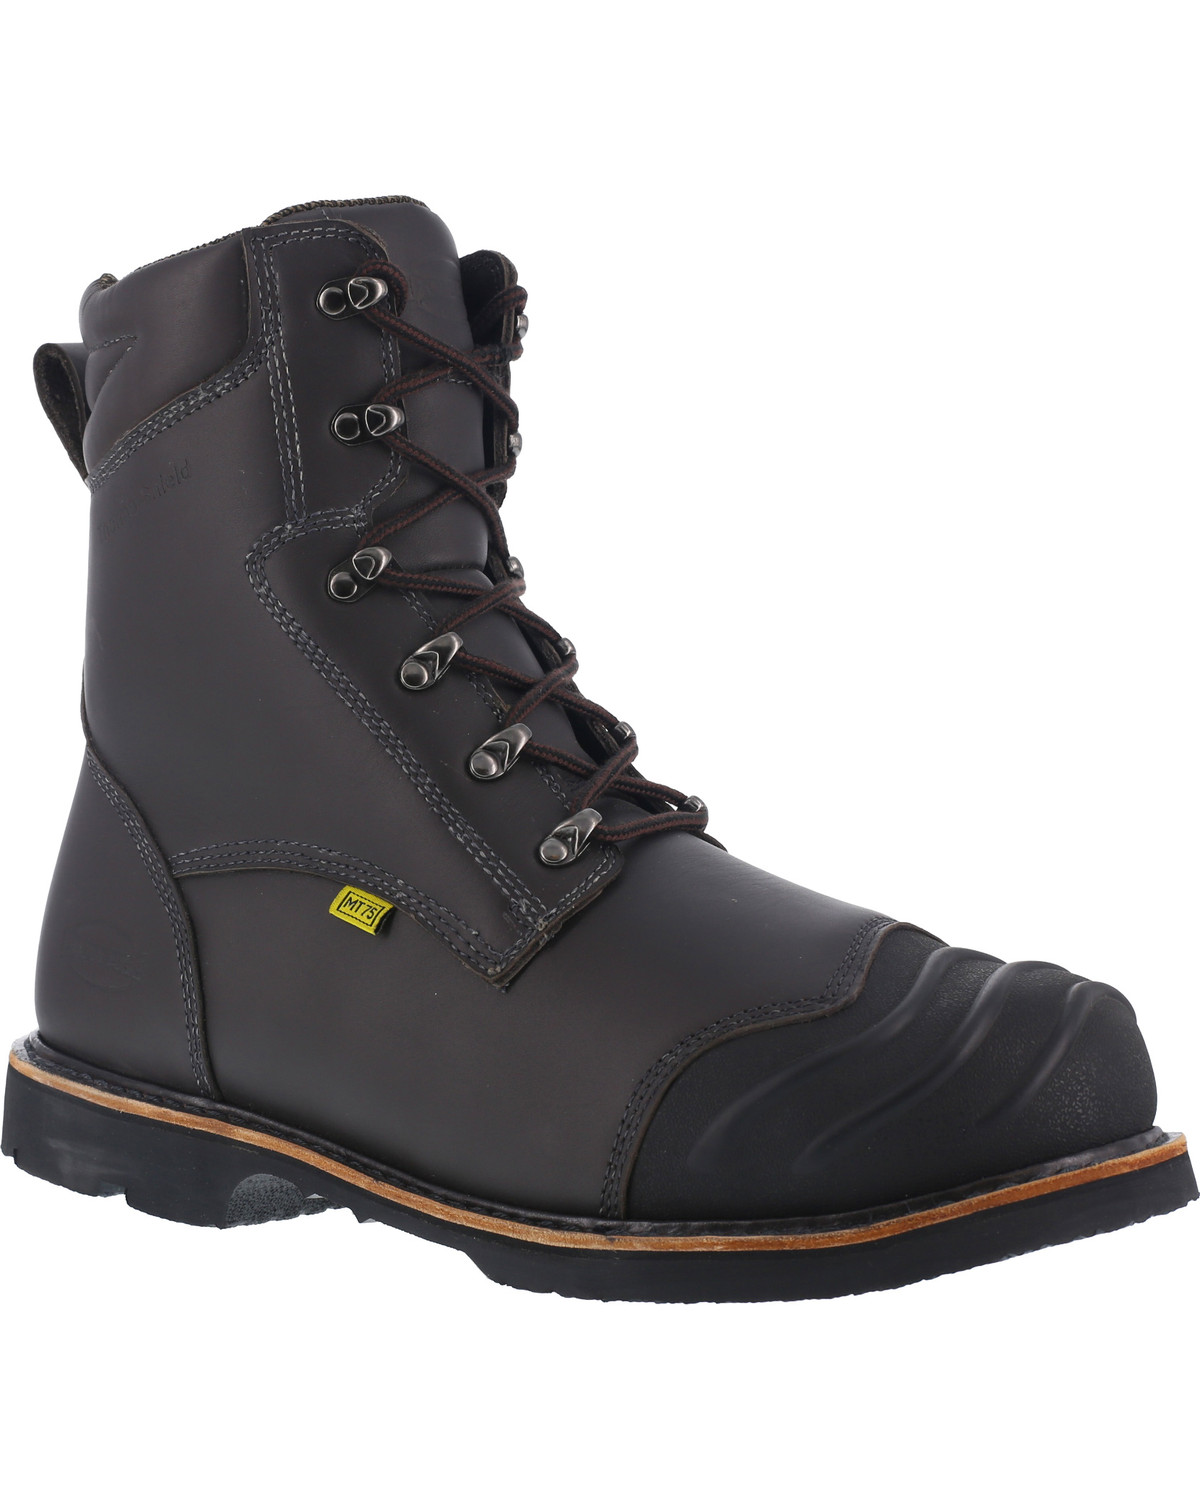 Iron Age Men's 8" Thermos Shield Work Boots - Composite Toe